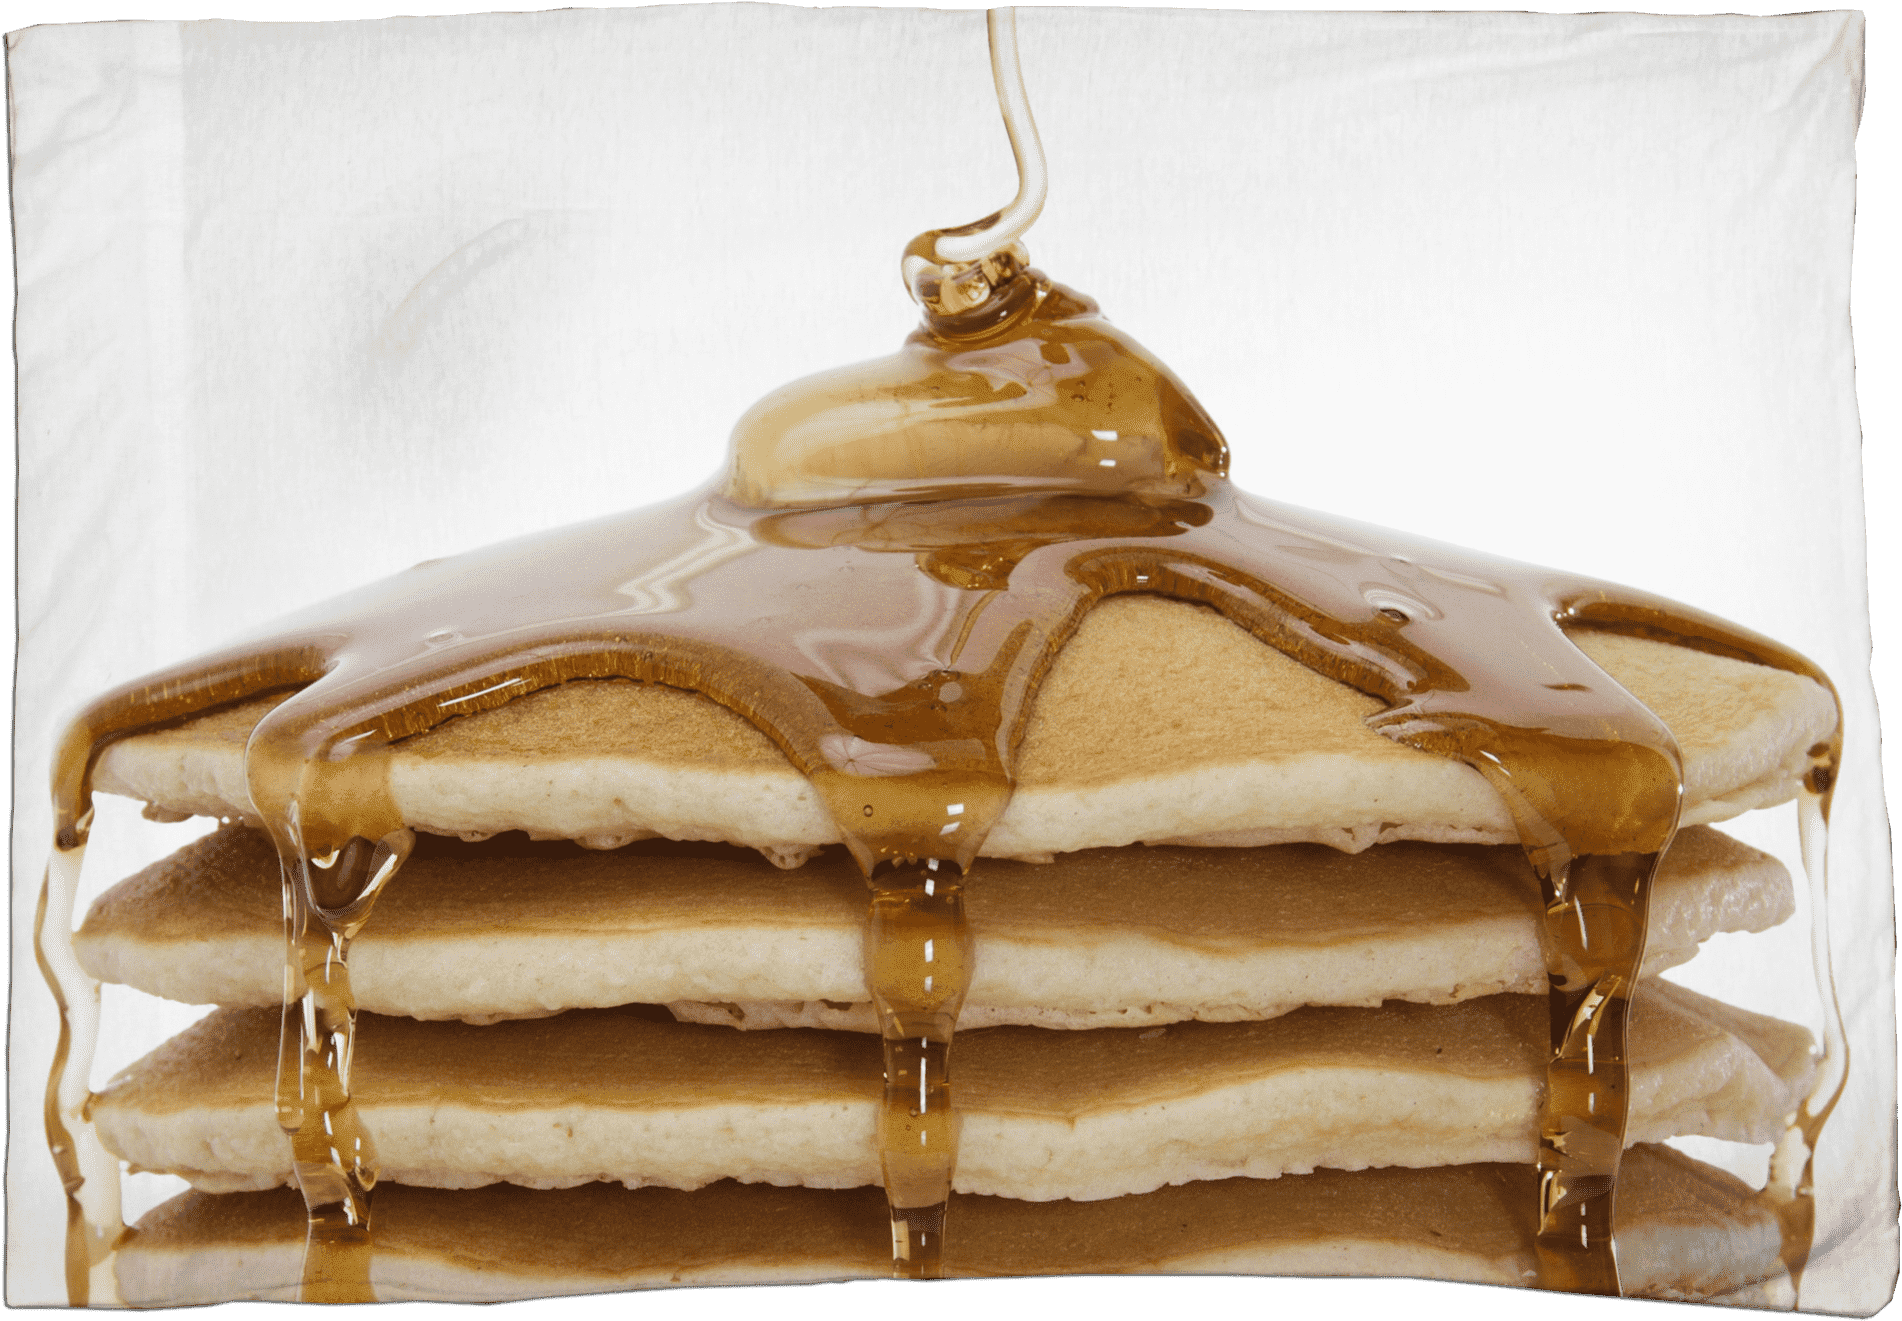 A Stack Of Pancakes With Syrup